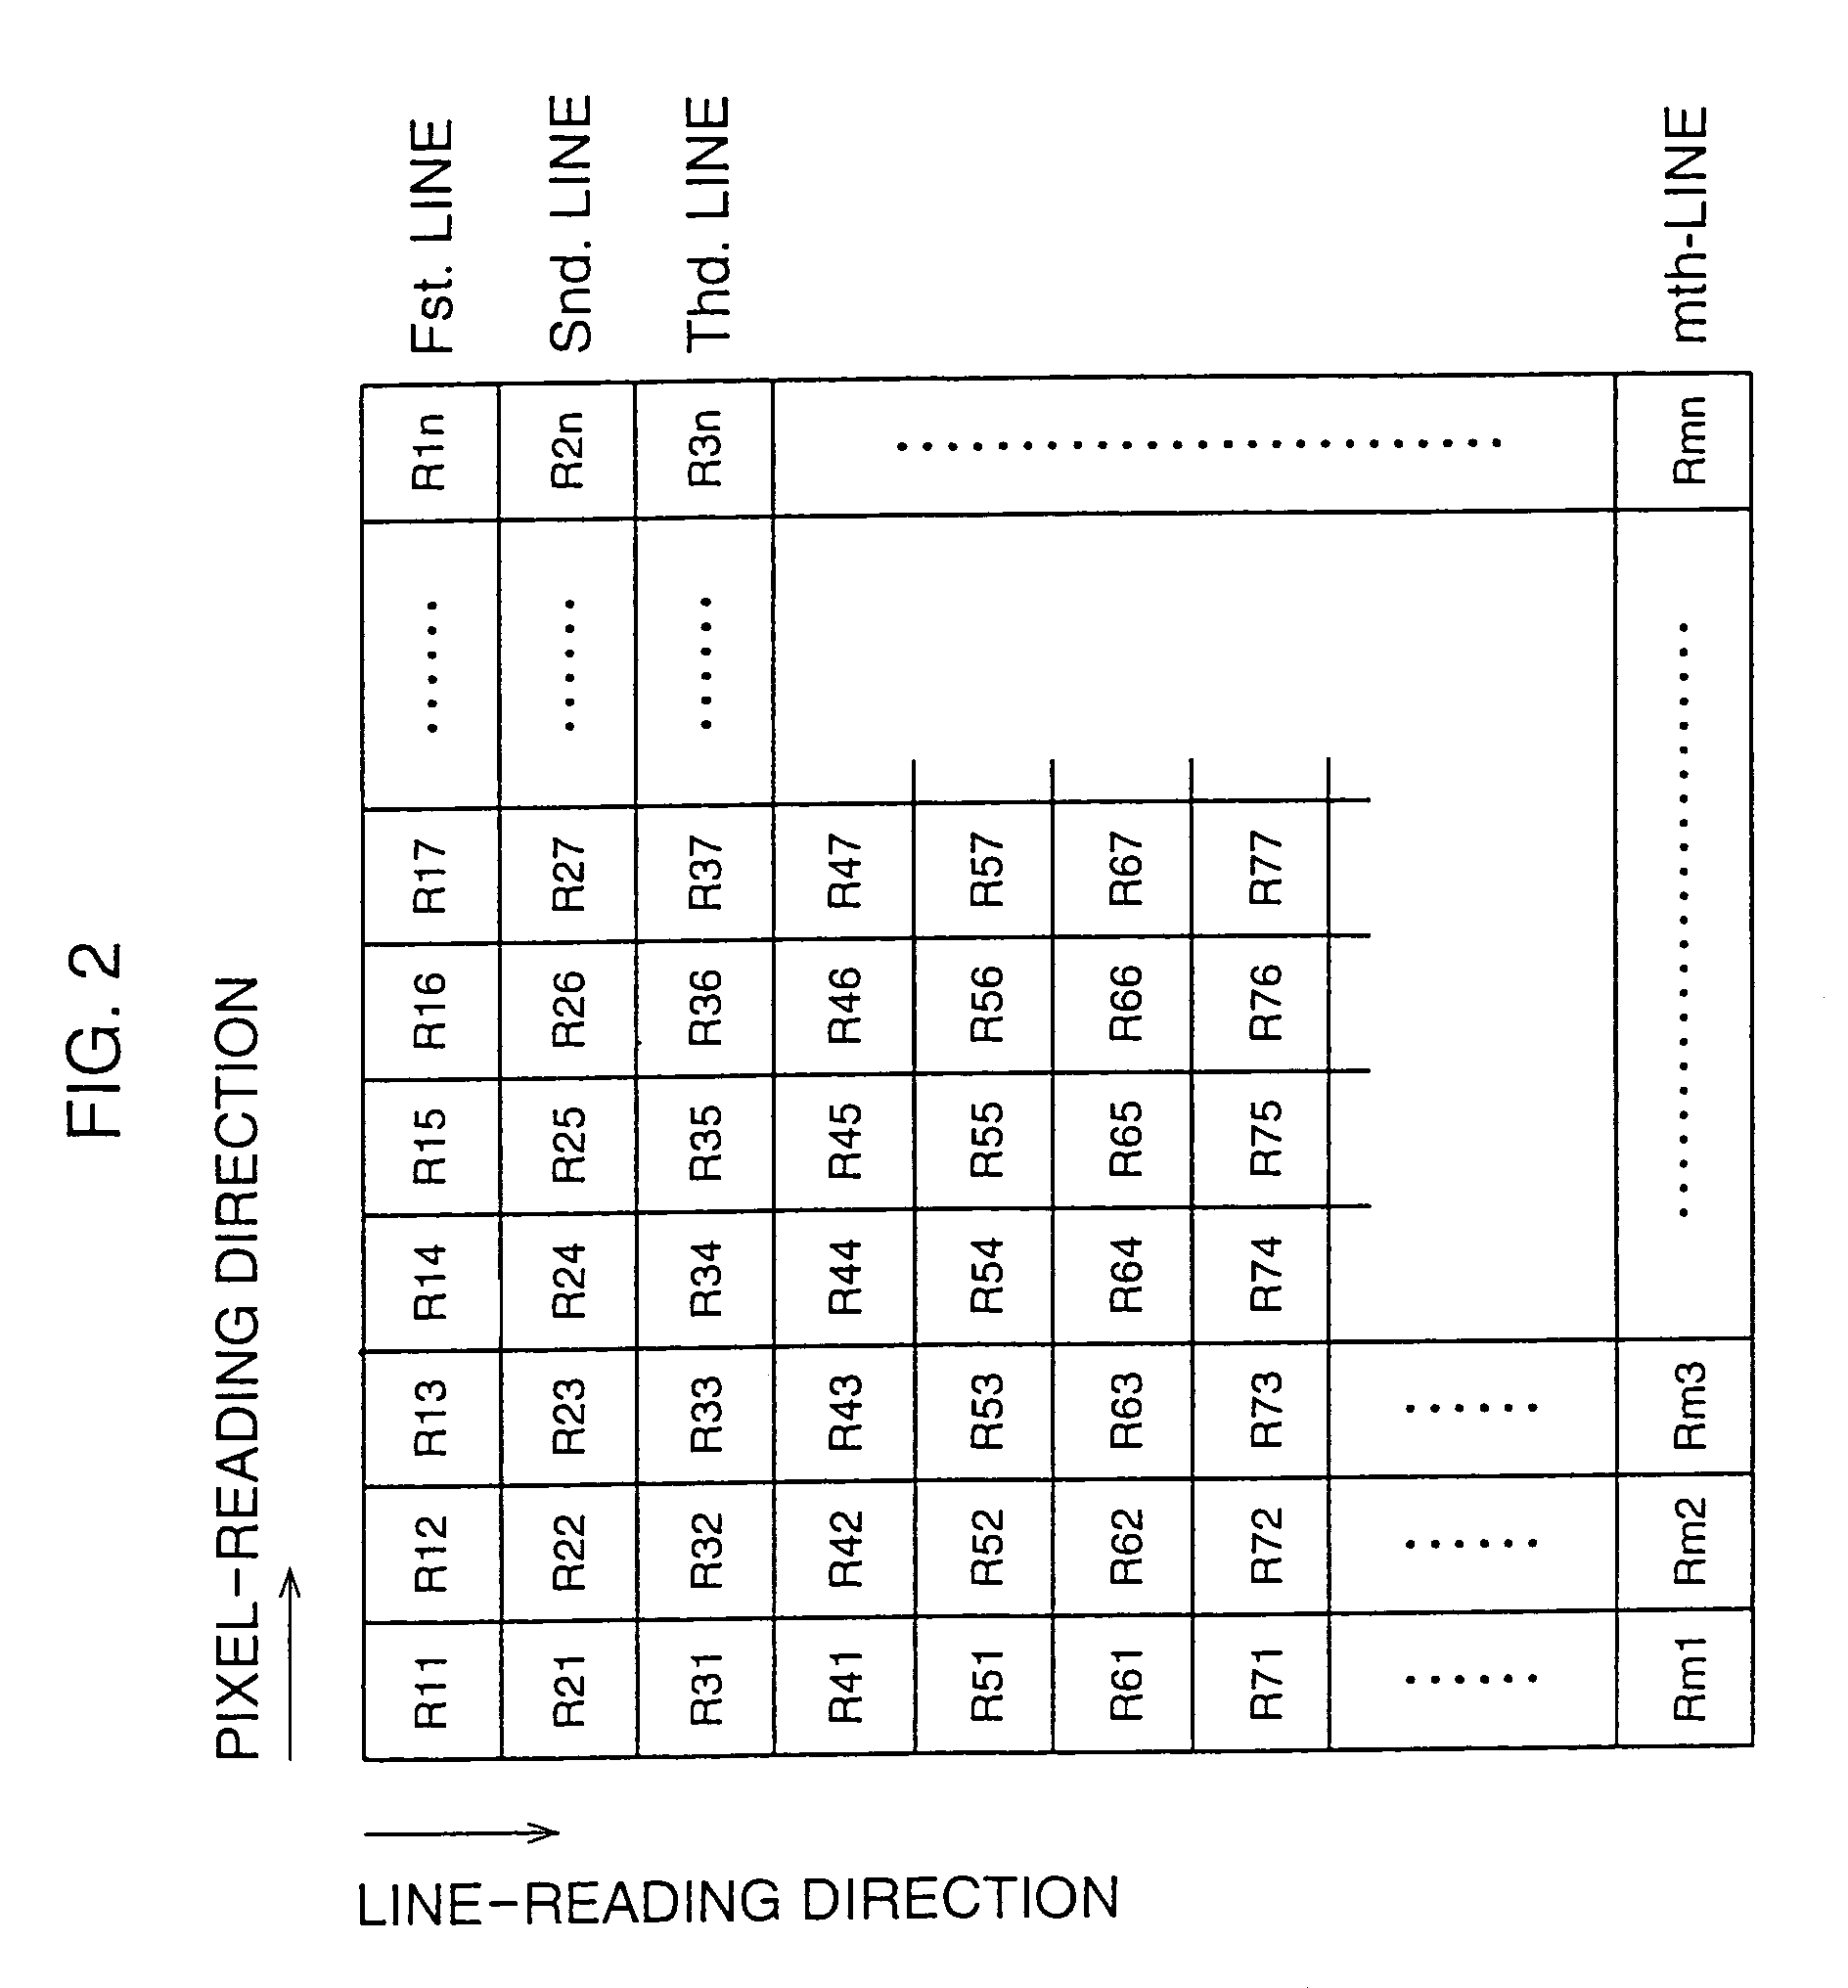 Electronic endoscope system with color-balance alteration process